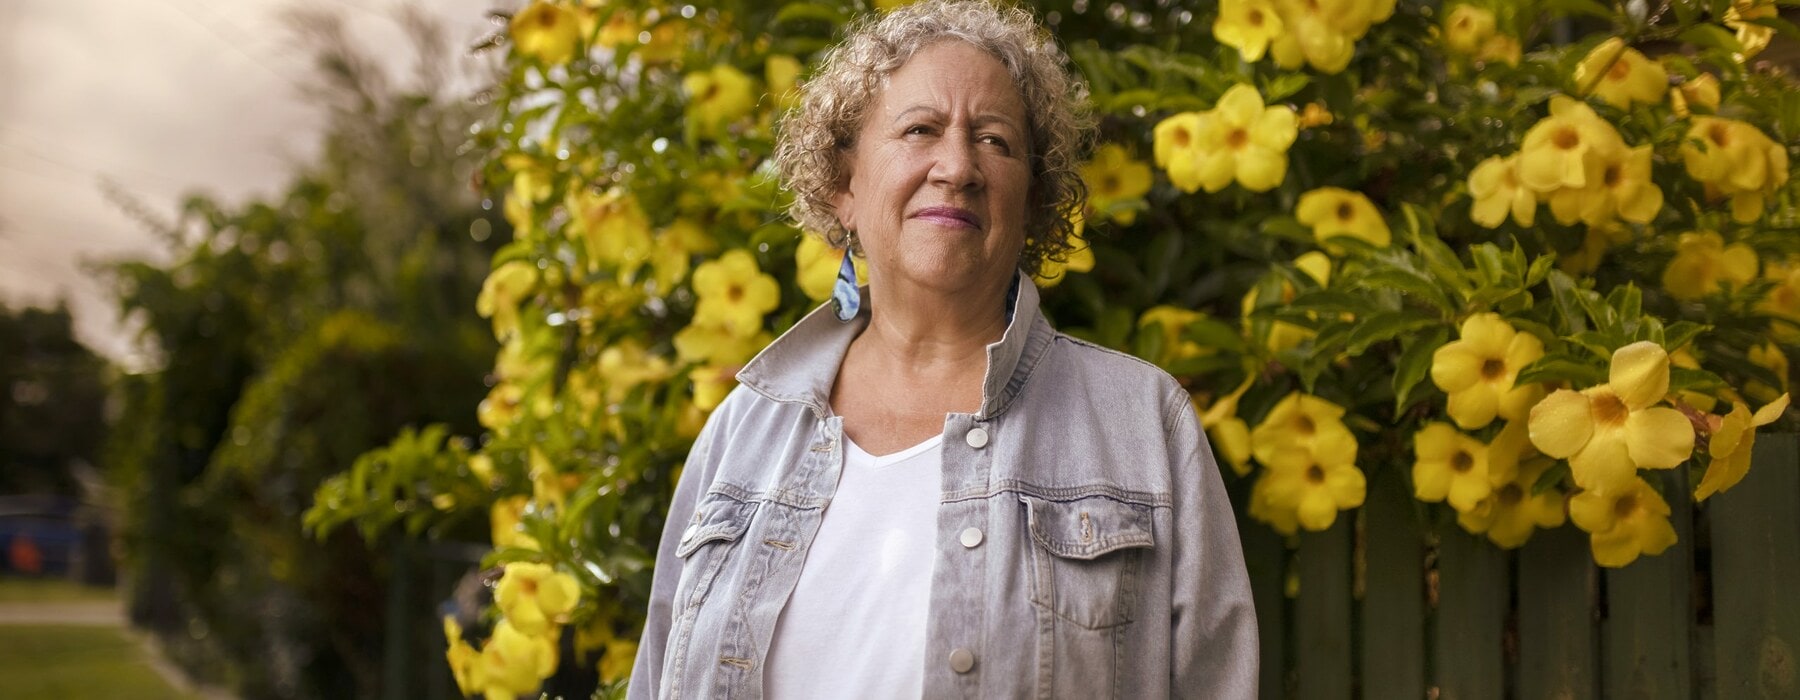 Sharon Armstrong standing by yellow tree